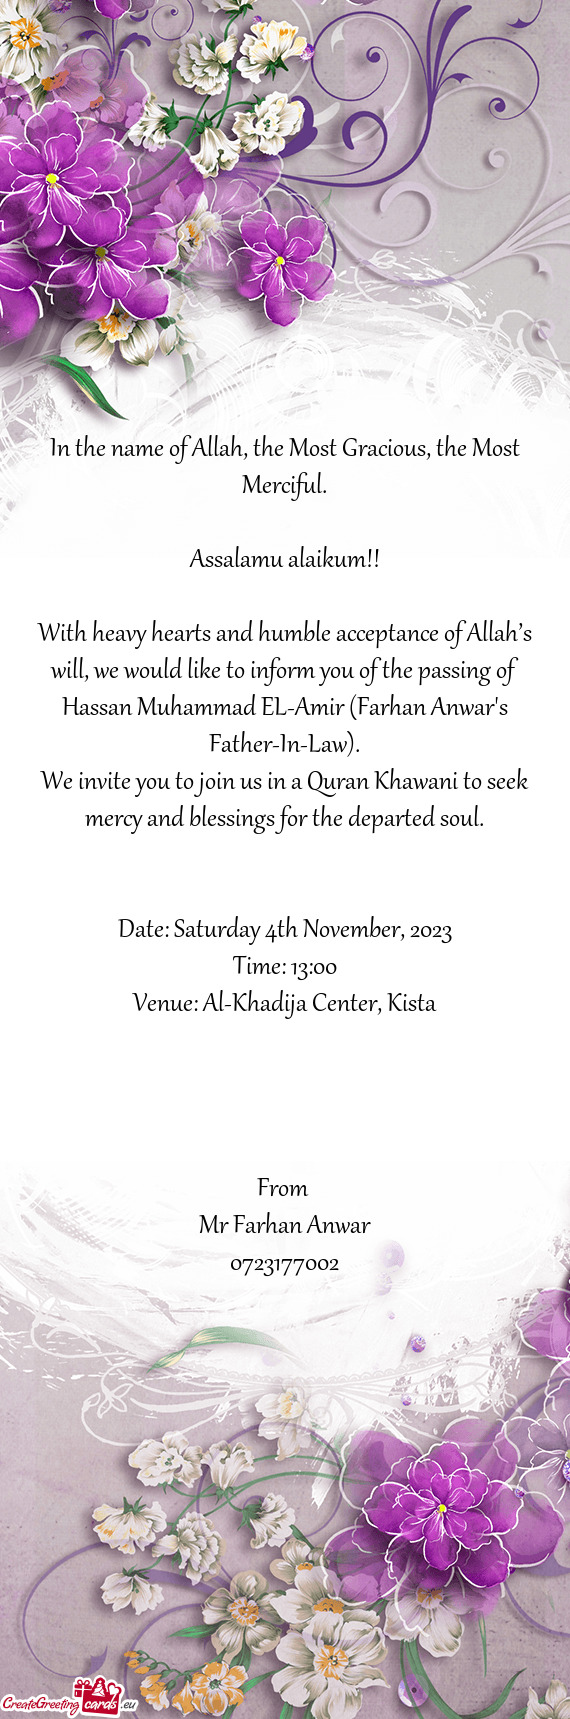 With heavy hearts and humble acceptance of Allah’s will, we would like to inform you of the passin